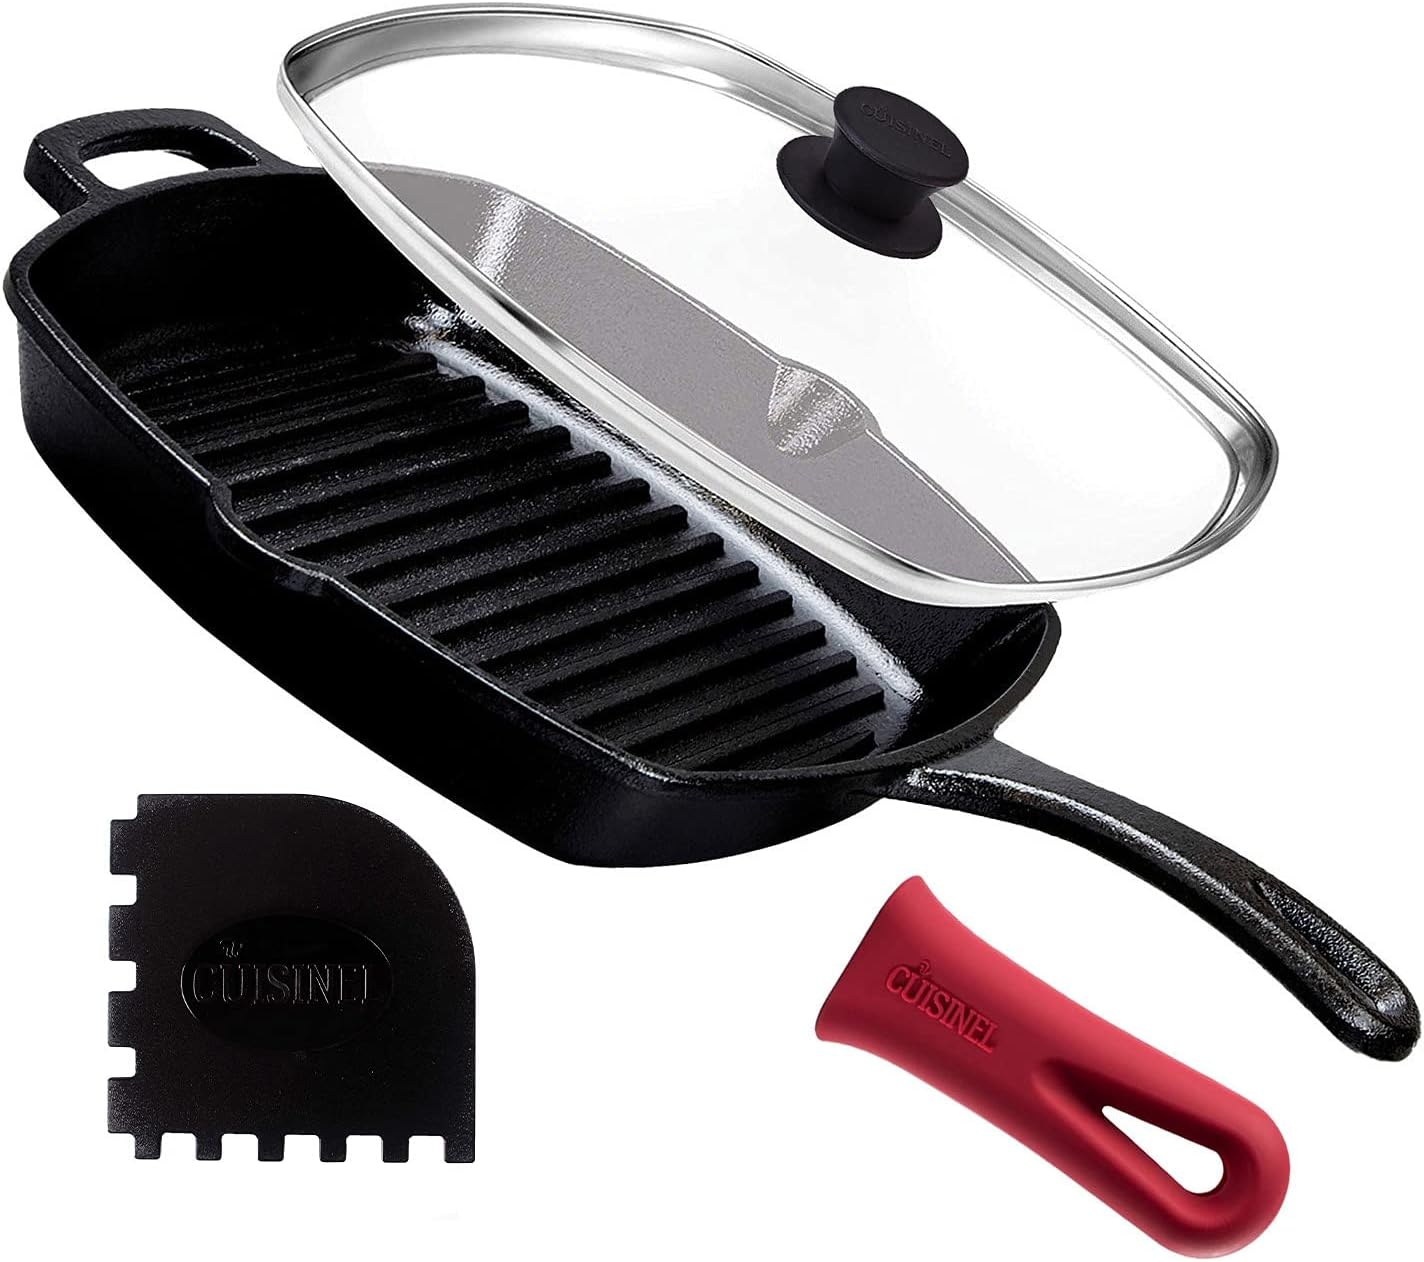 Grill Stovetop Indoor and Outdoor Use 2 Heat-Resistant Holders 8-Inch and 12-Inch Induction Safe Oven Safe Cookware Pre-Seasoned Cast Iron Skillet 2-Piece Set